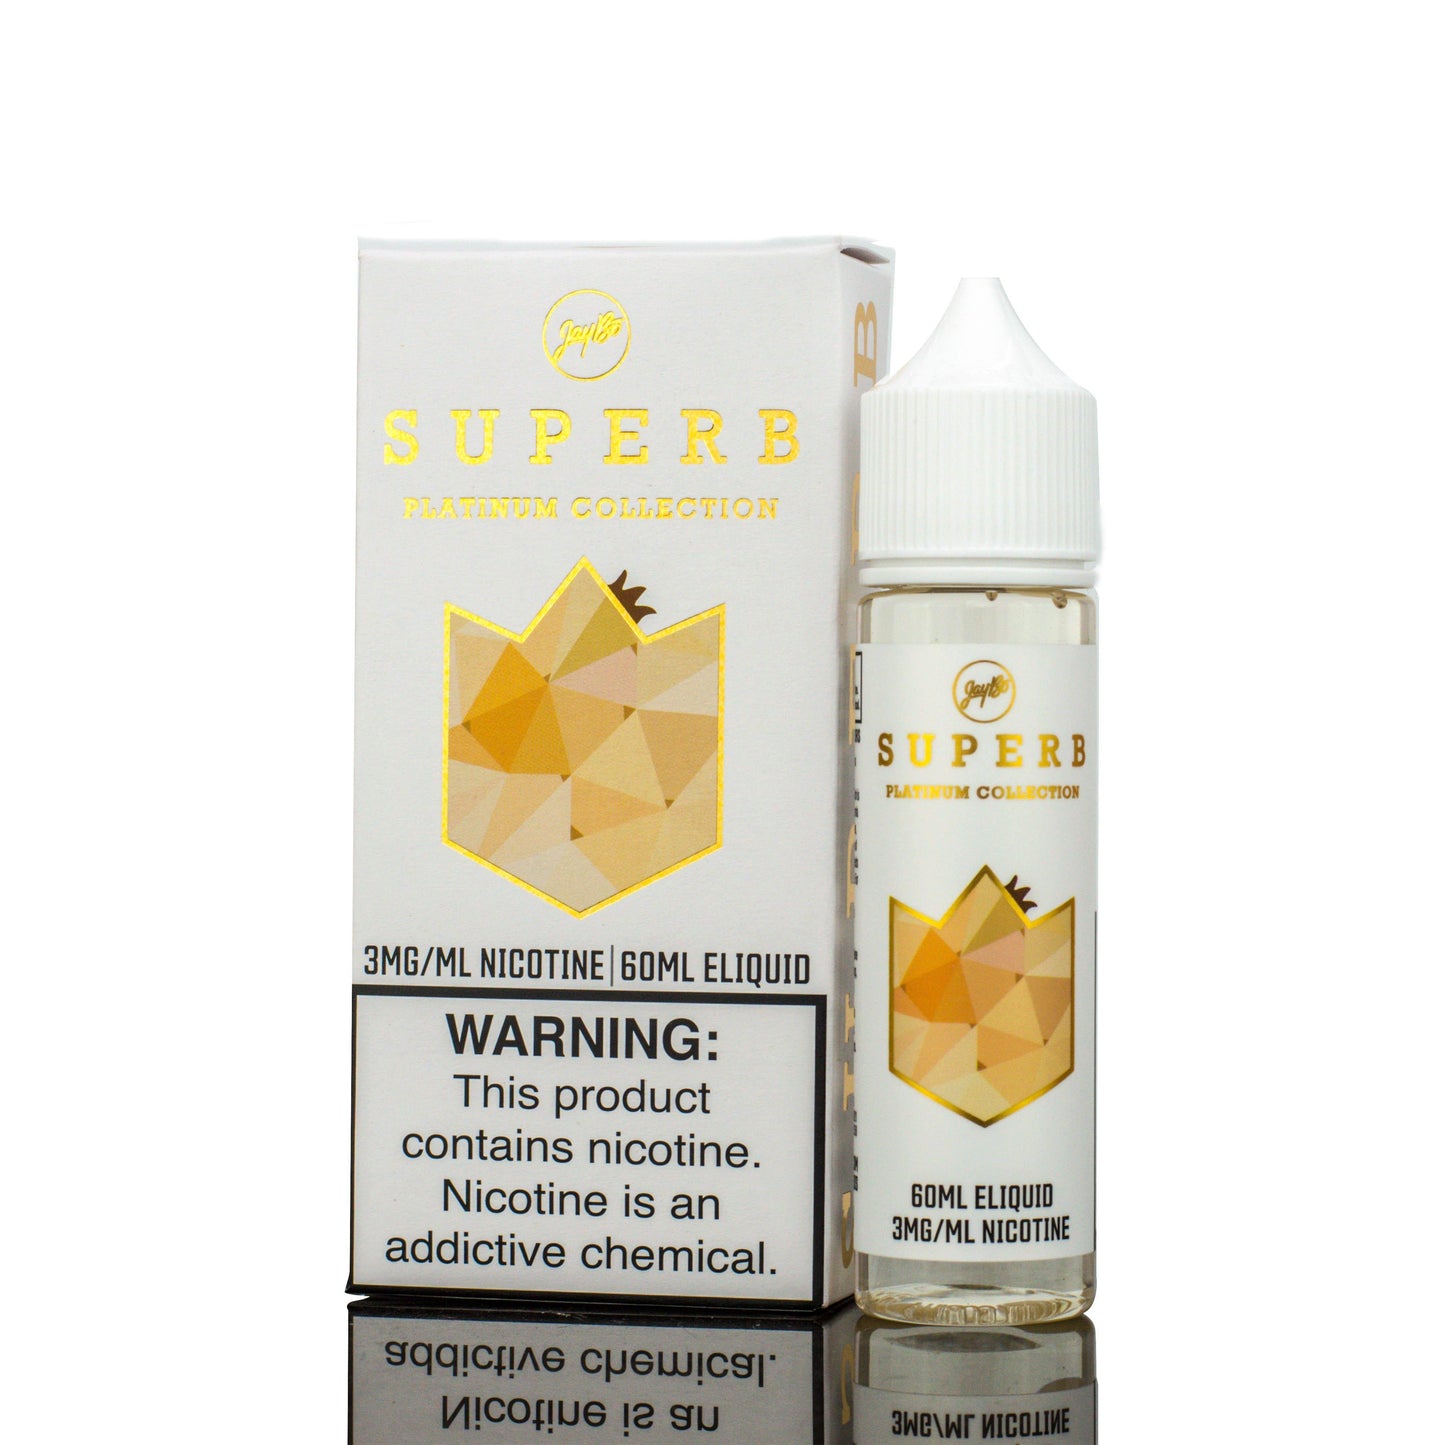 SUPERB X JAYBO PLATINUM COLLECTION | White Currant 60ML eLiquid with Packaging